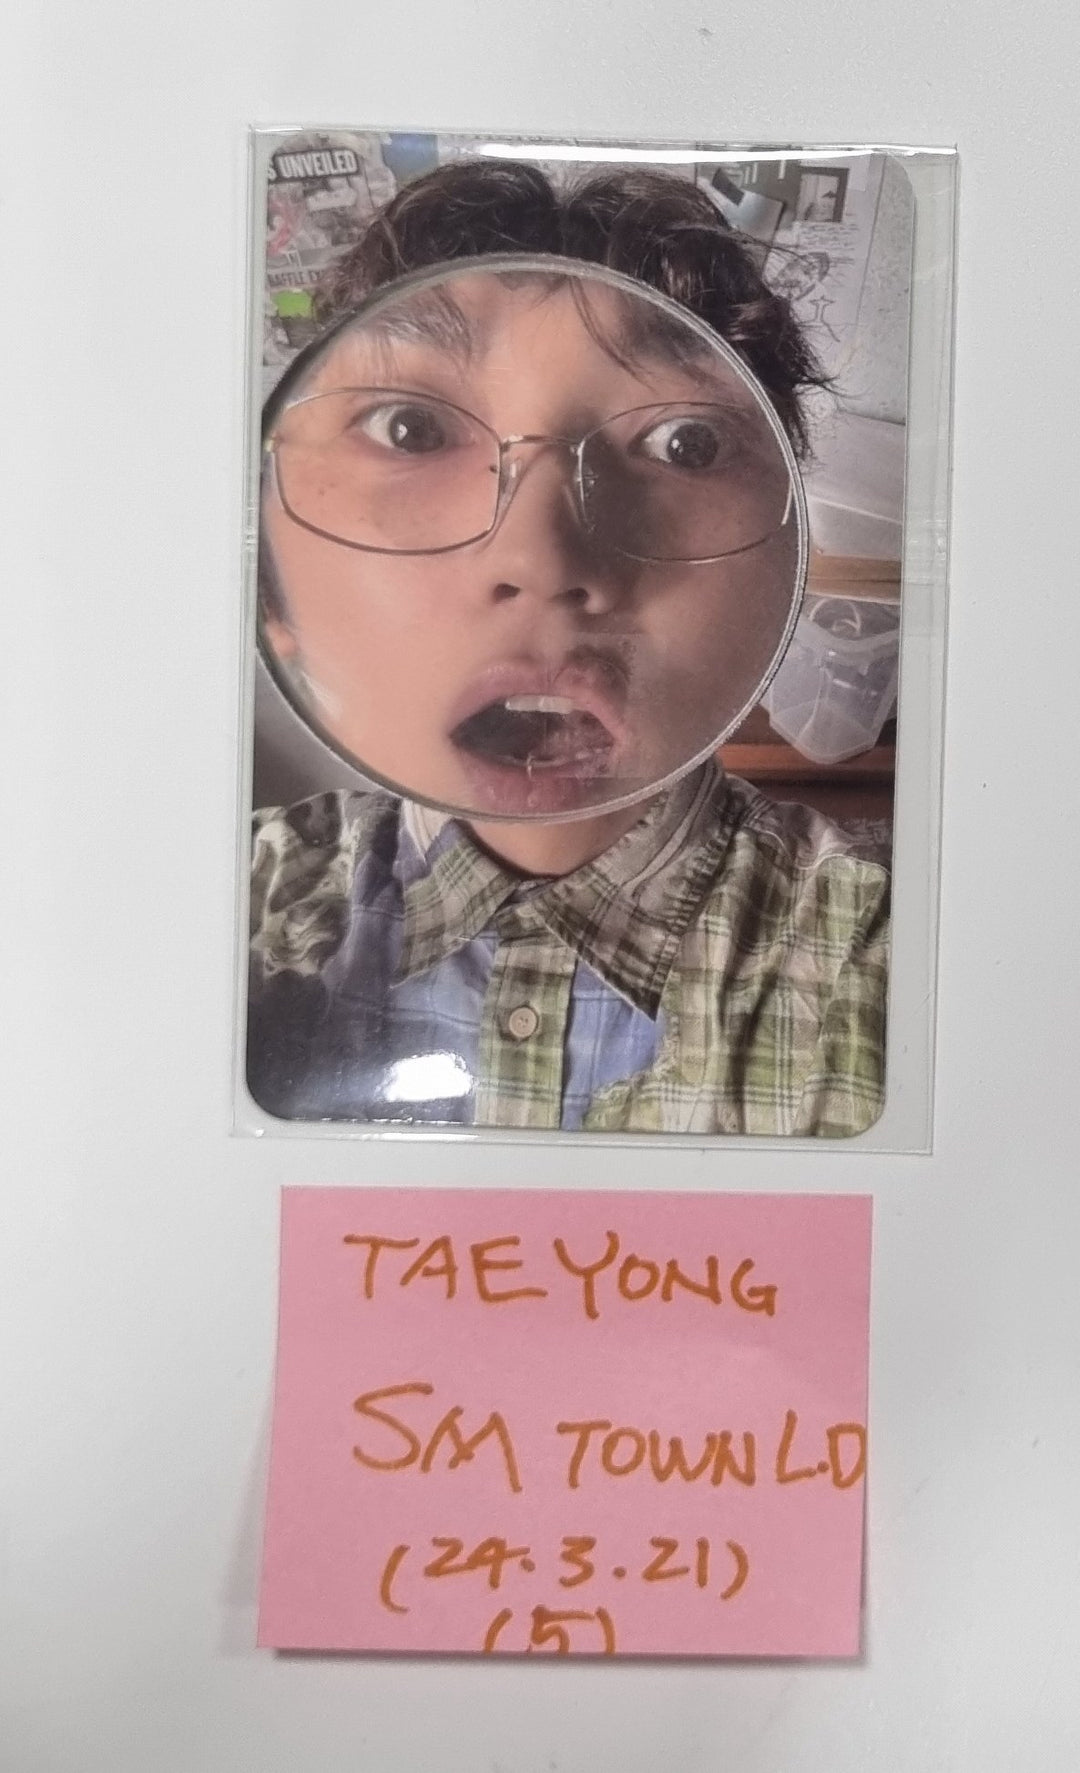 TAEYONG "TAP" 2nd Mini - SM Town Lucky Draw Event Photocard [24.3.21]